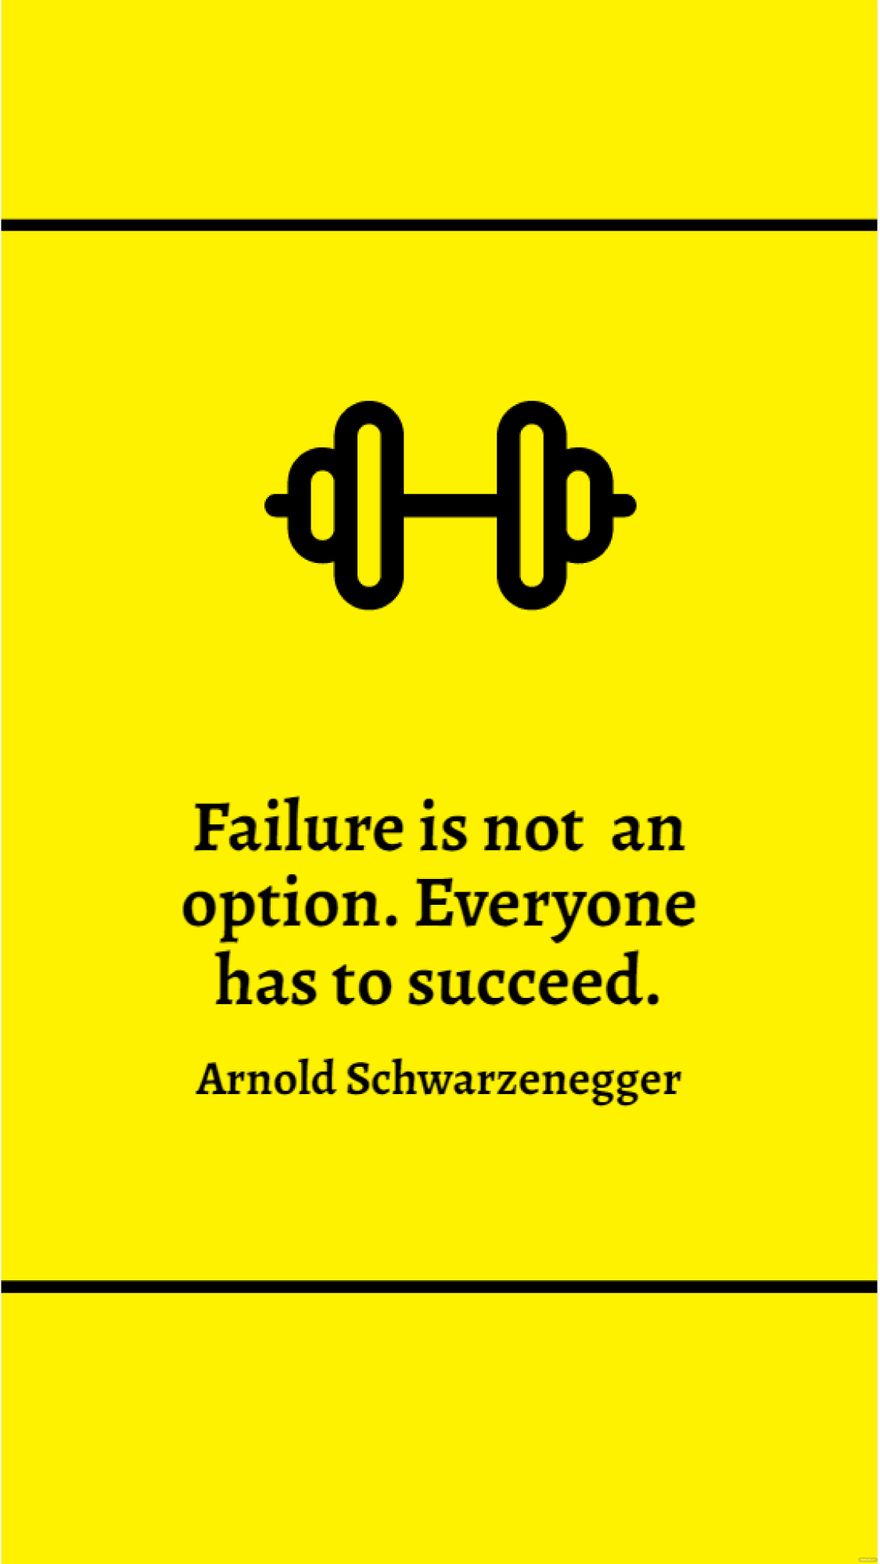 Arnold Schwarzenegger - Failure is not an option. Everyone has to succeed.